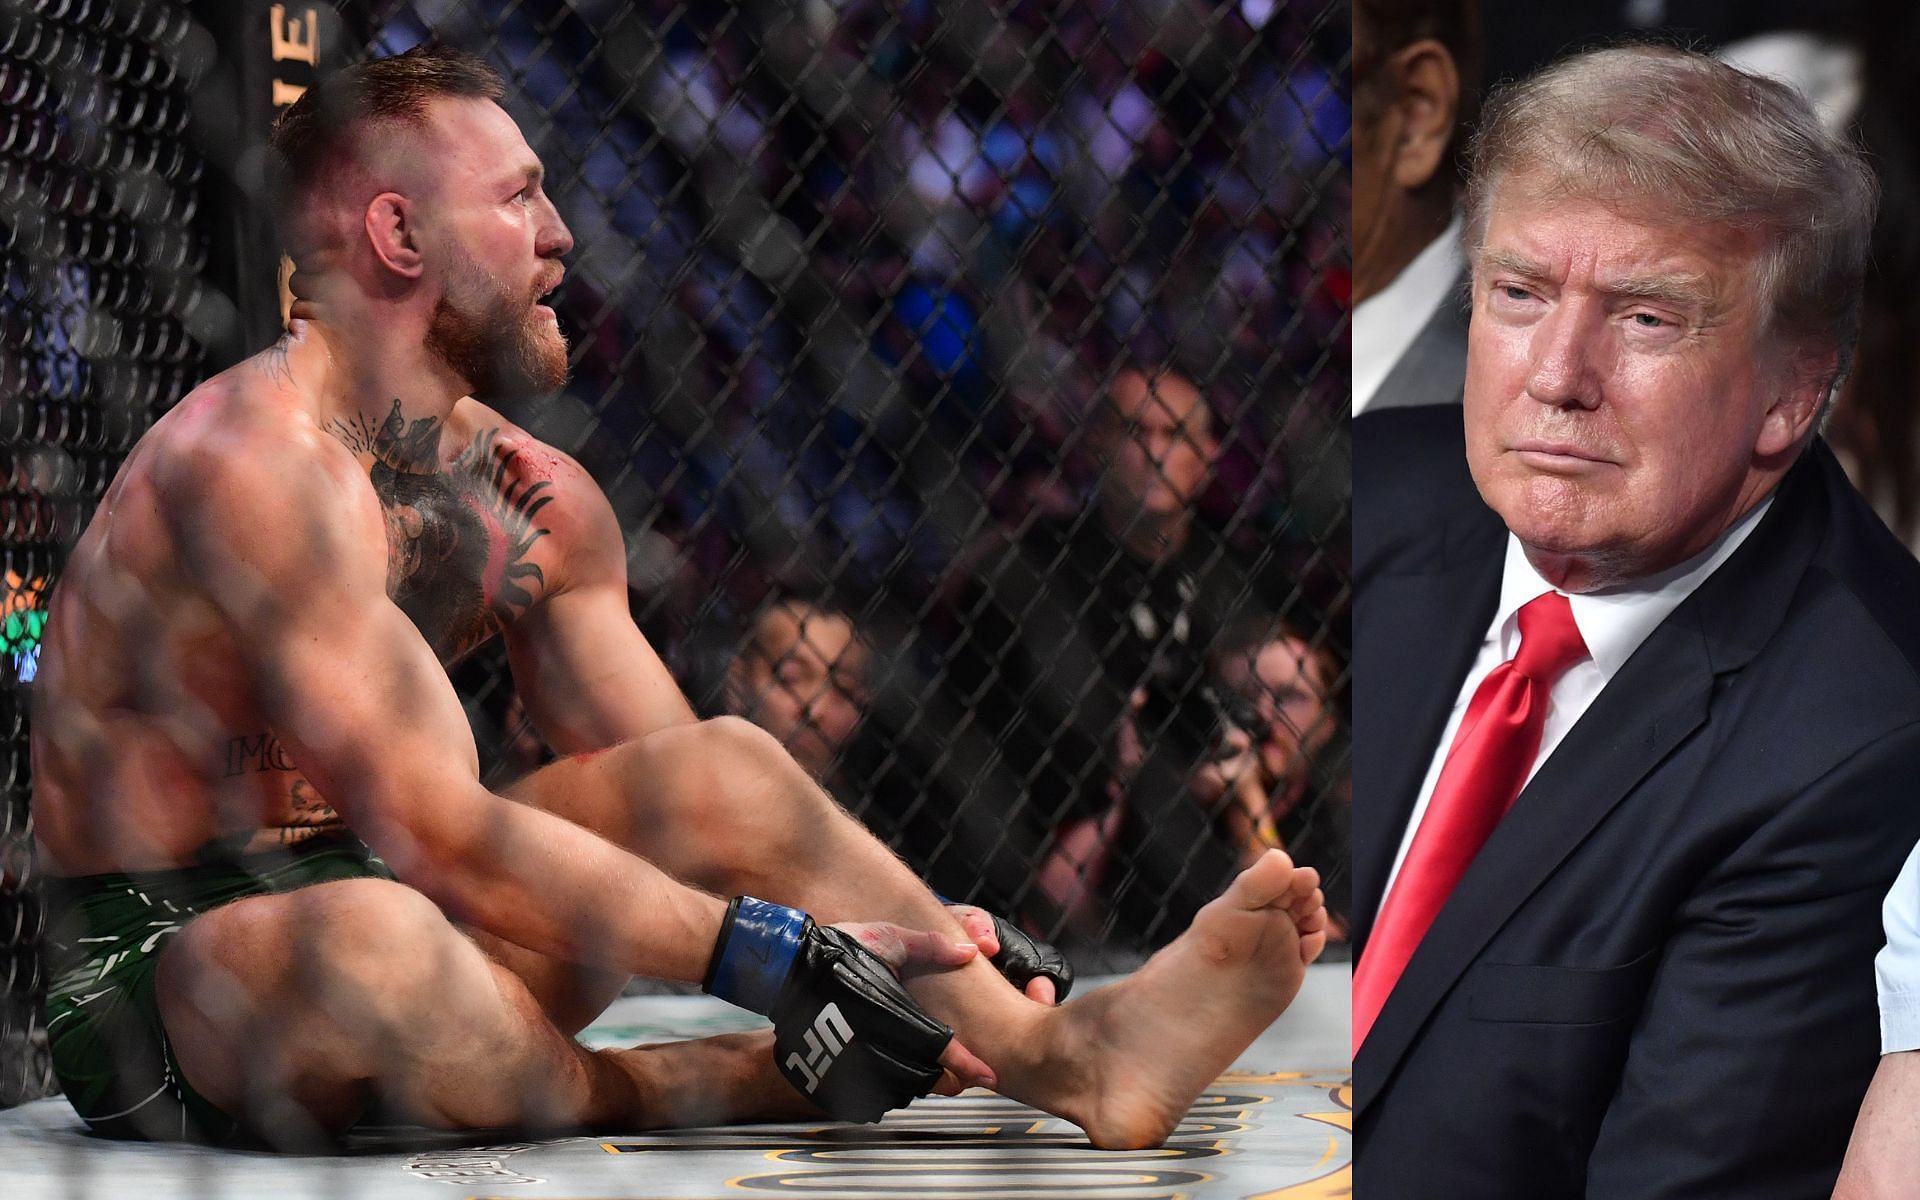 Conor McGregor (left) and Donald Trump (right). [Images courtesy: left image from USA Today and right image from Getty Images]